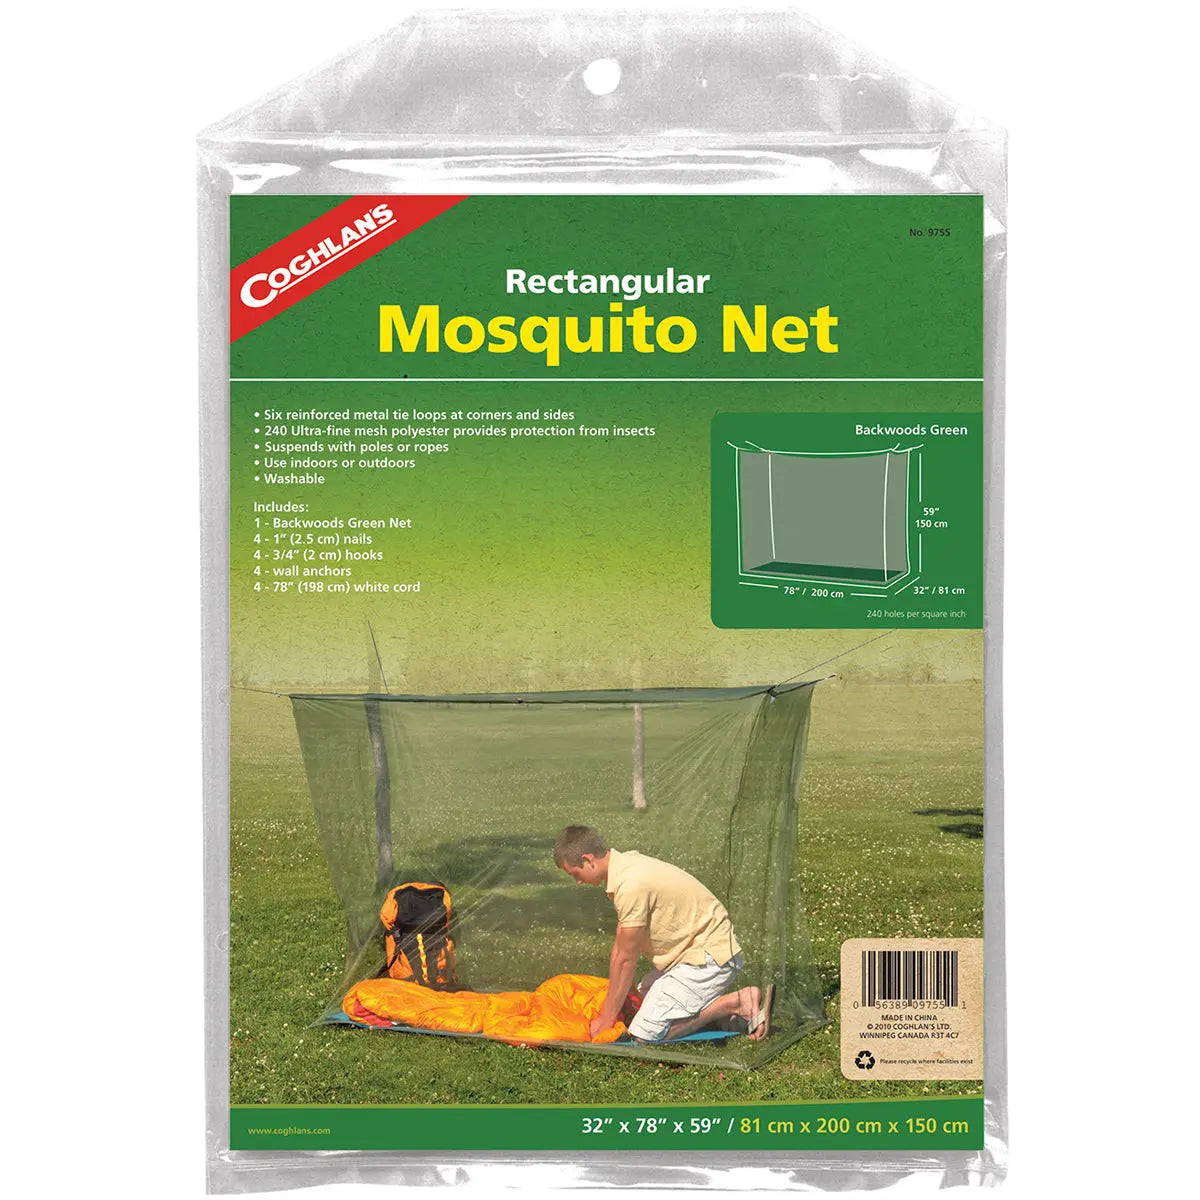 Coghlan's Rectangular Mosquito Net, Green, Mesh Netting Protects from Insects Coghlan's